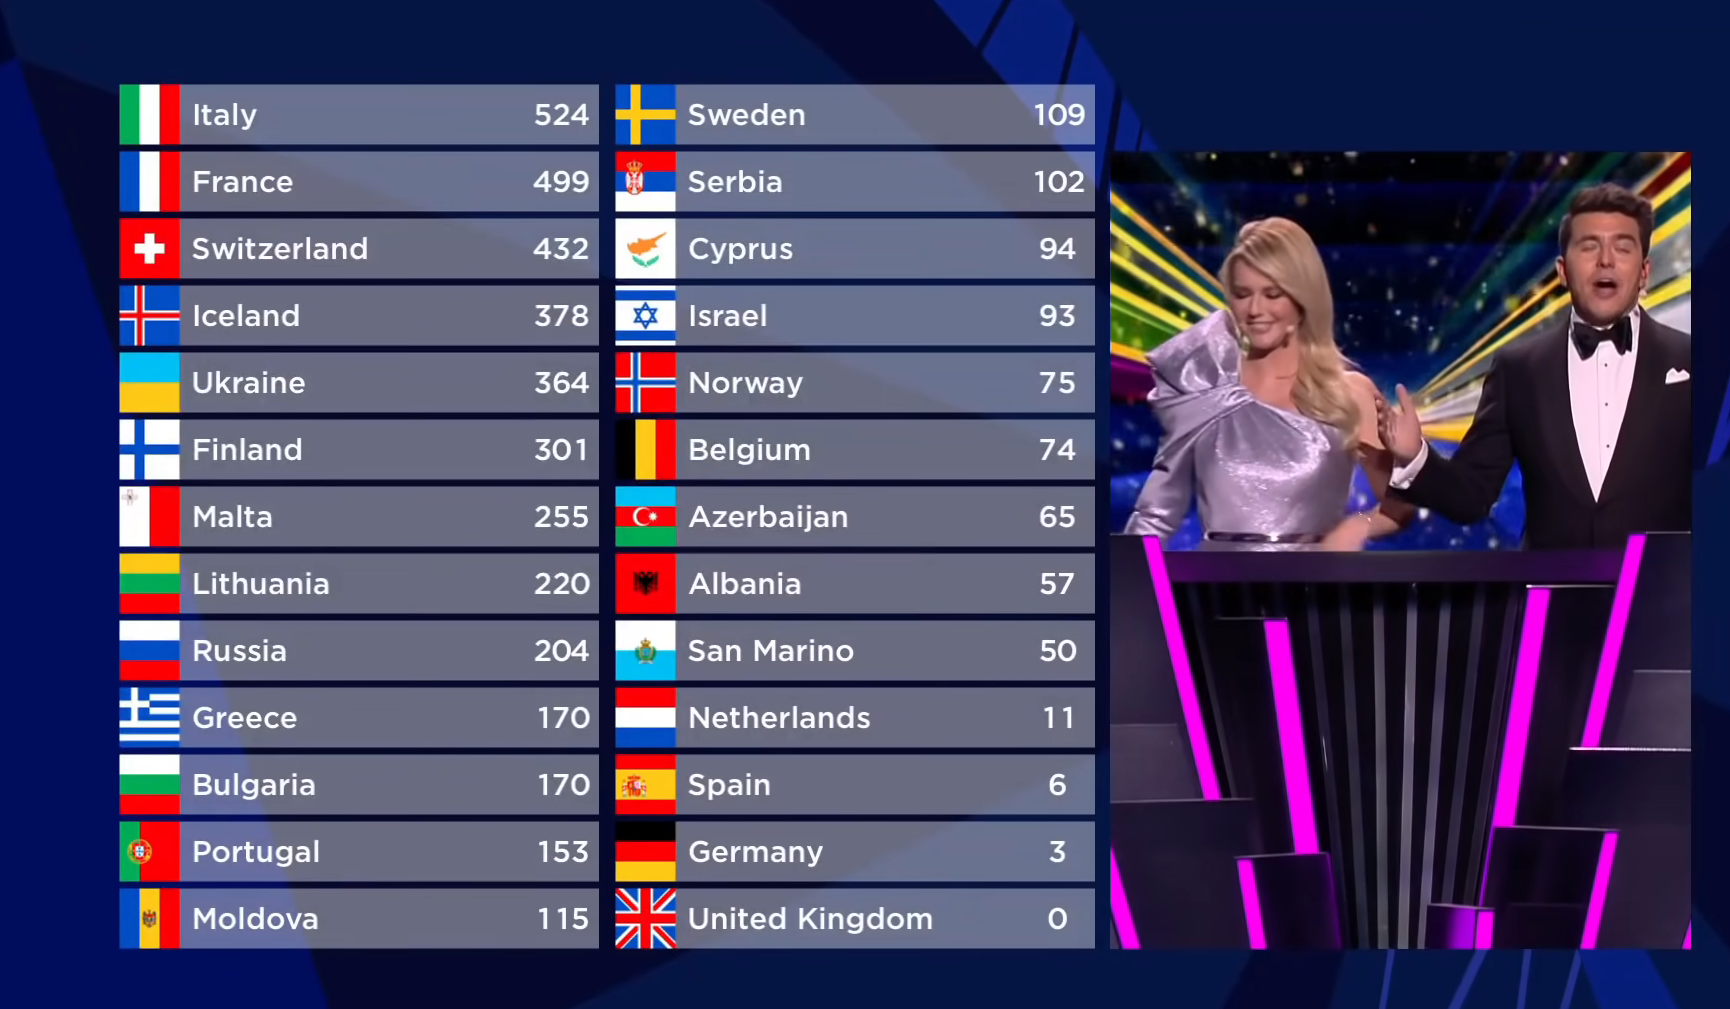 ''I prayed not to win'': French singer confesses why she was happy to get silver at Eurovision 2021